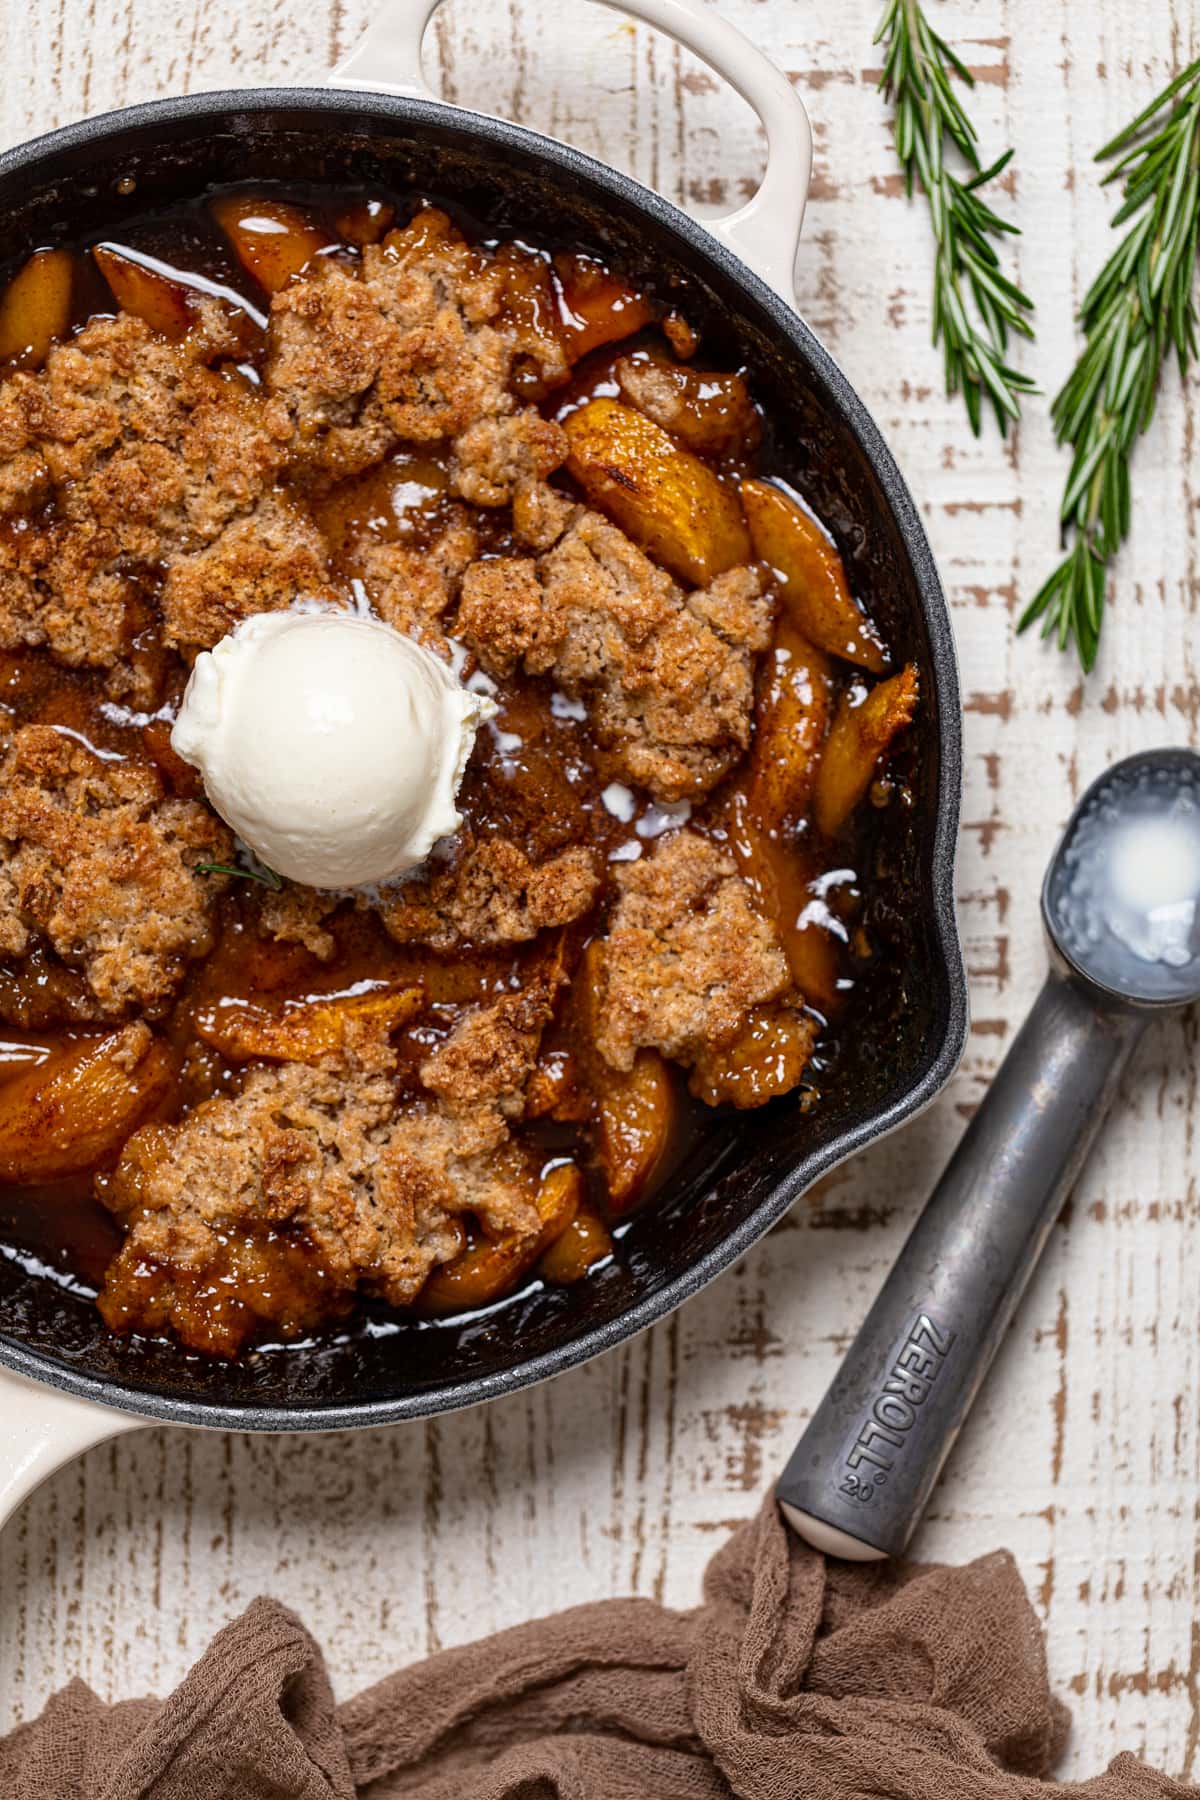 Vegan Southern Peach Cobbler topped with a scoop of dairy-free ice cream.